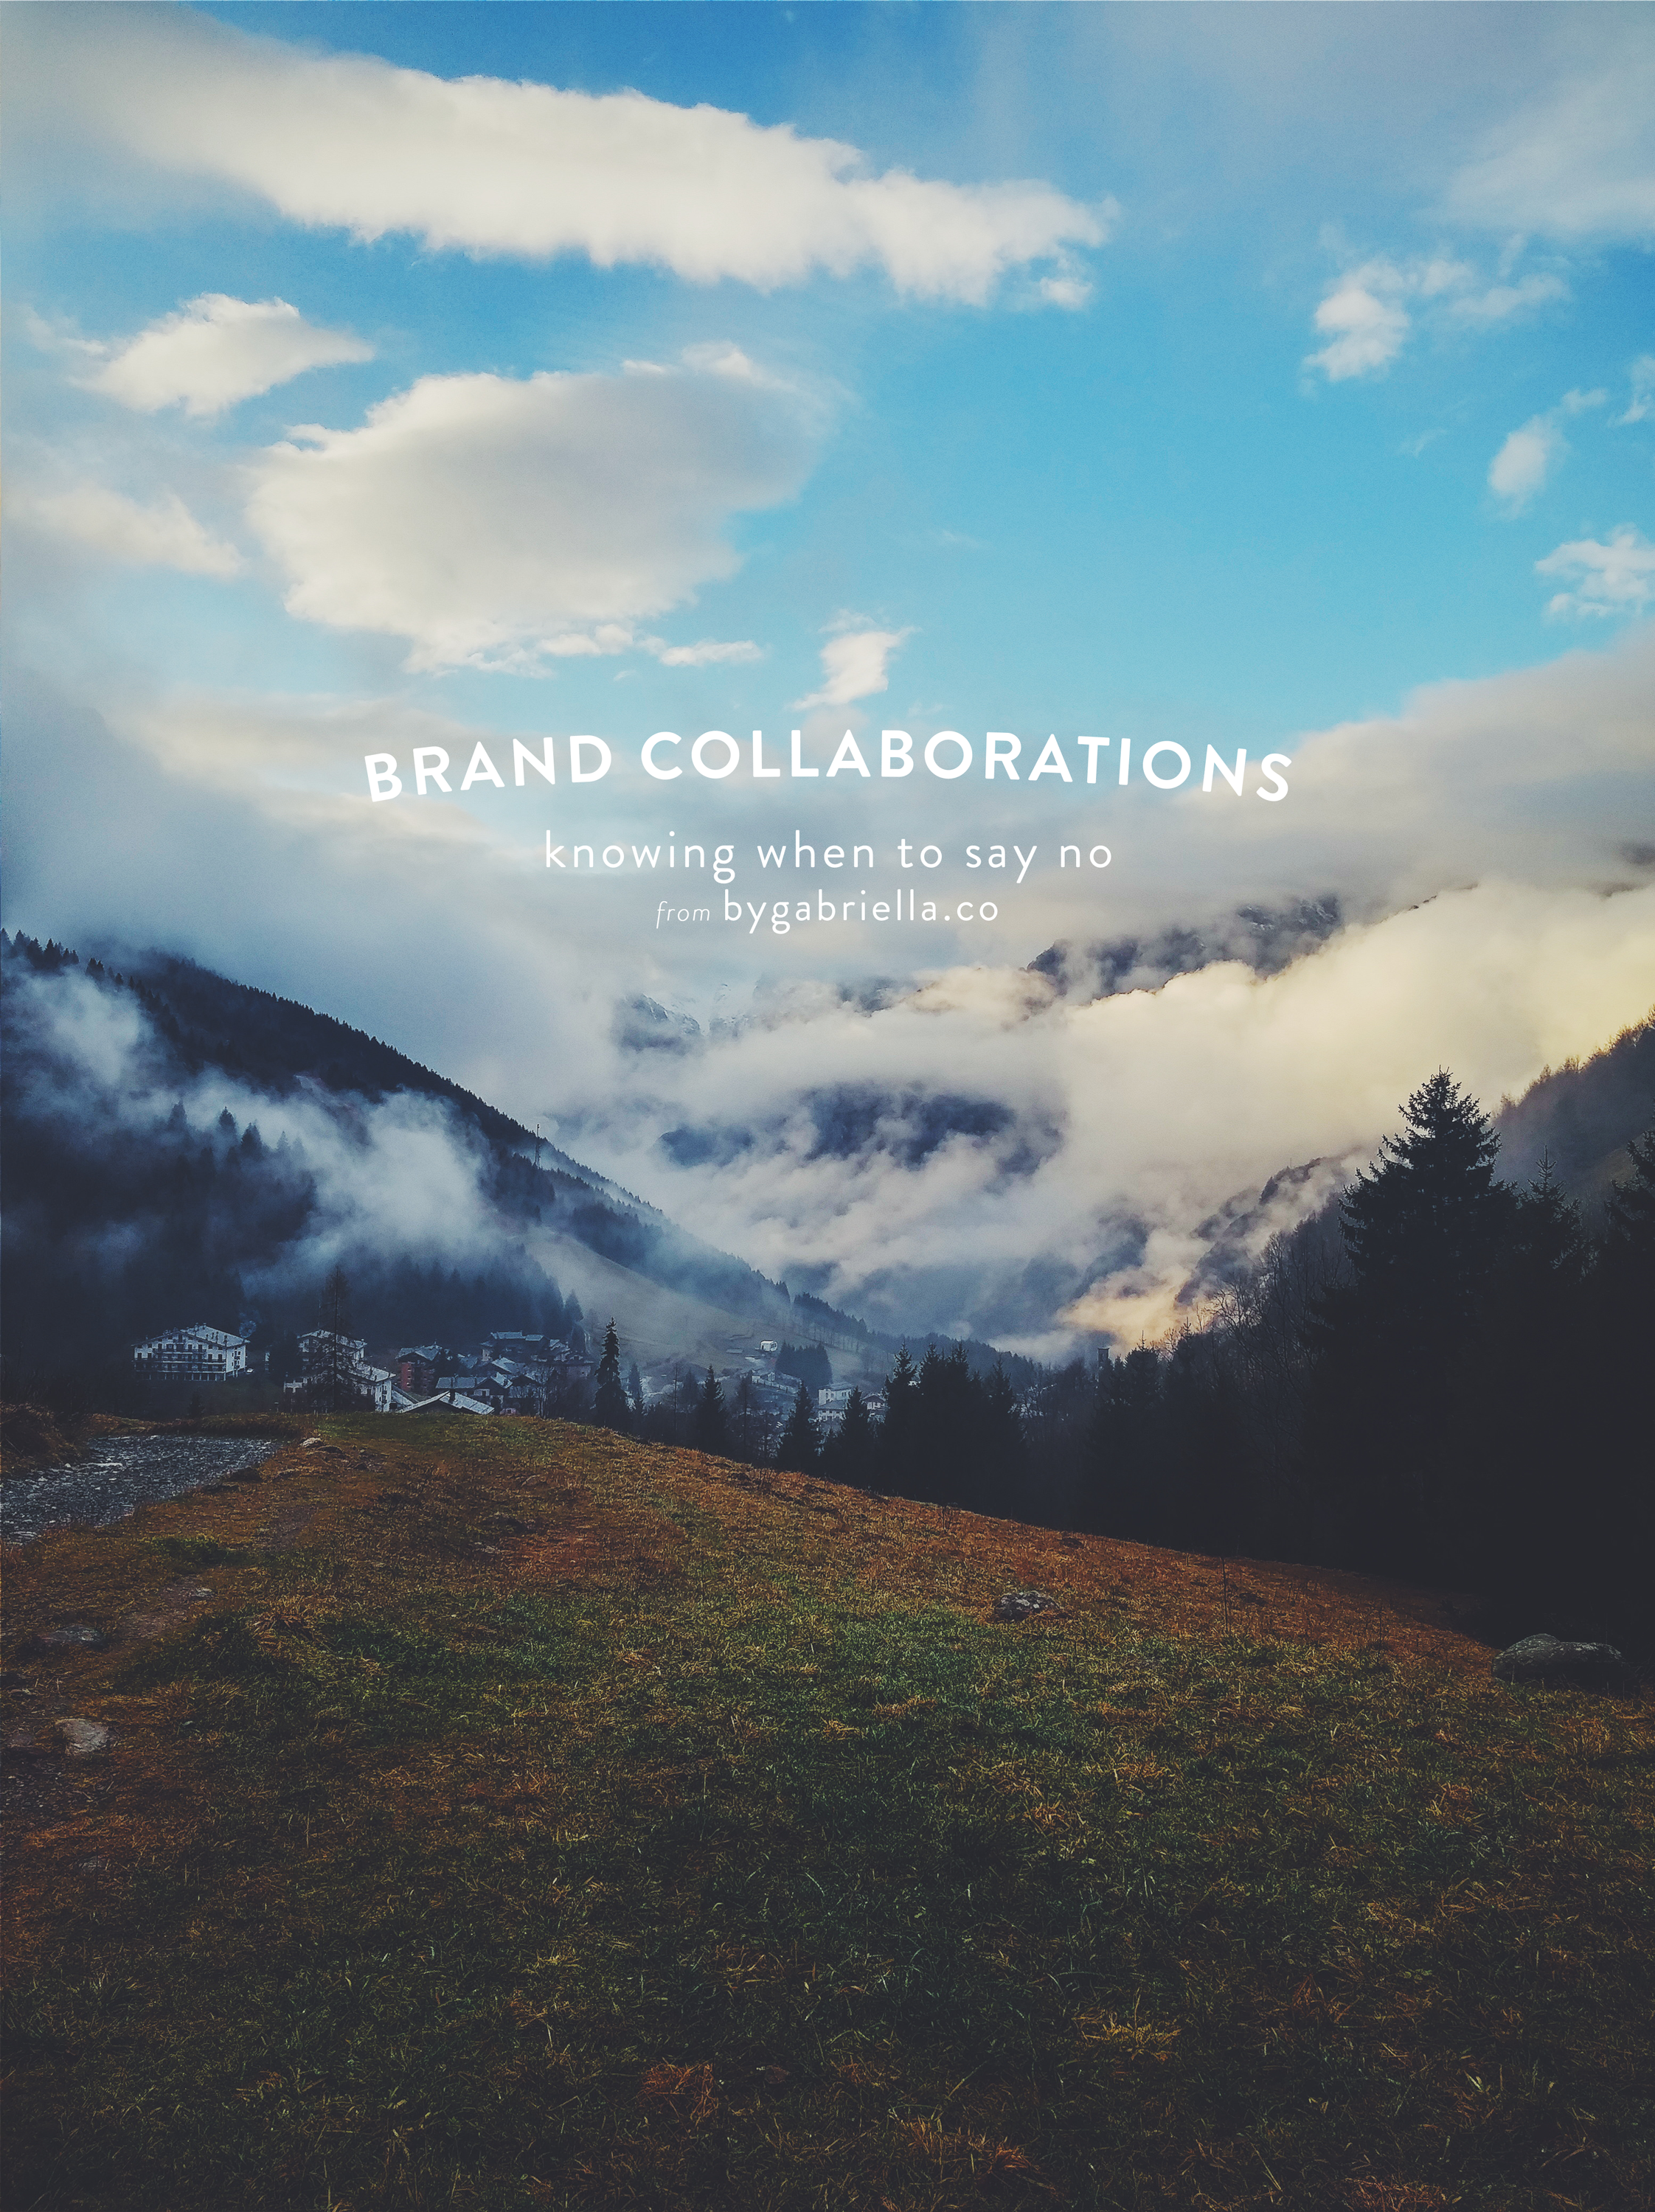 Brand Collaborations: Knowing when and how to say no to sponsored/collaborative opportunities | bygabriella.co